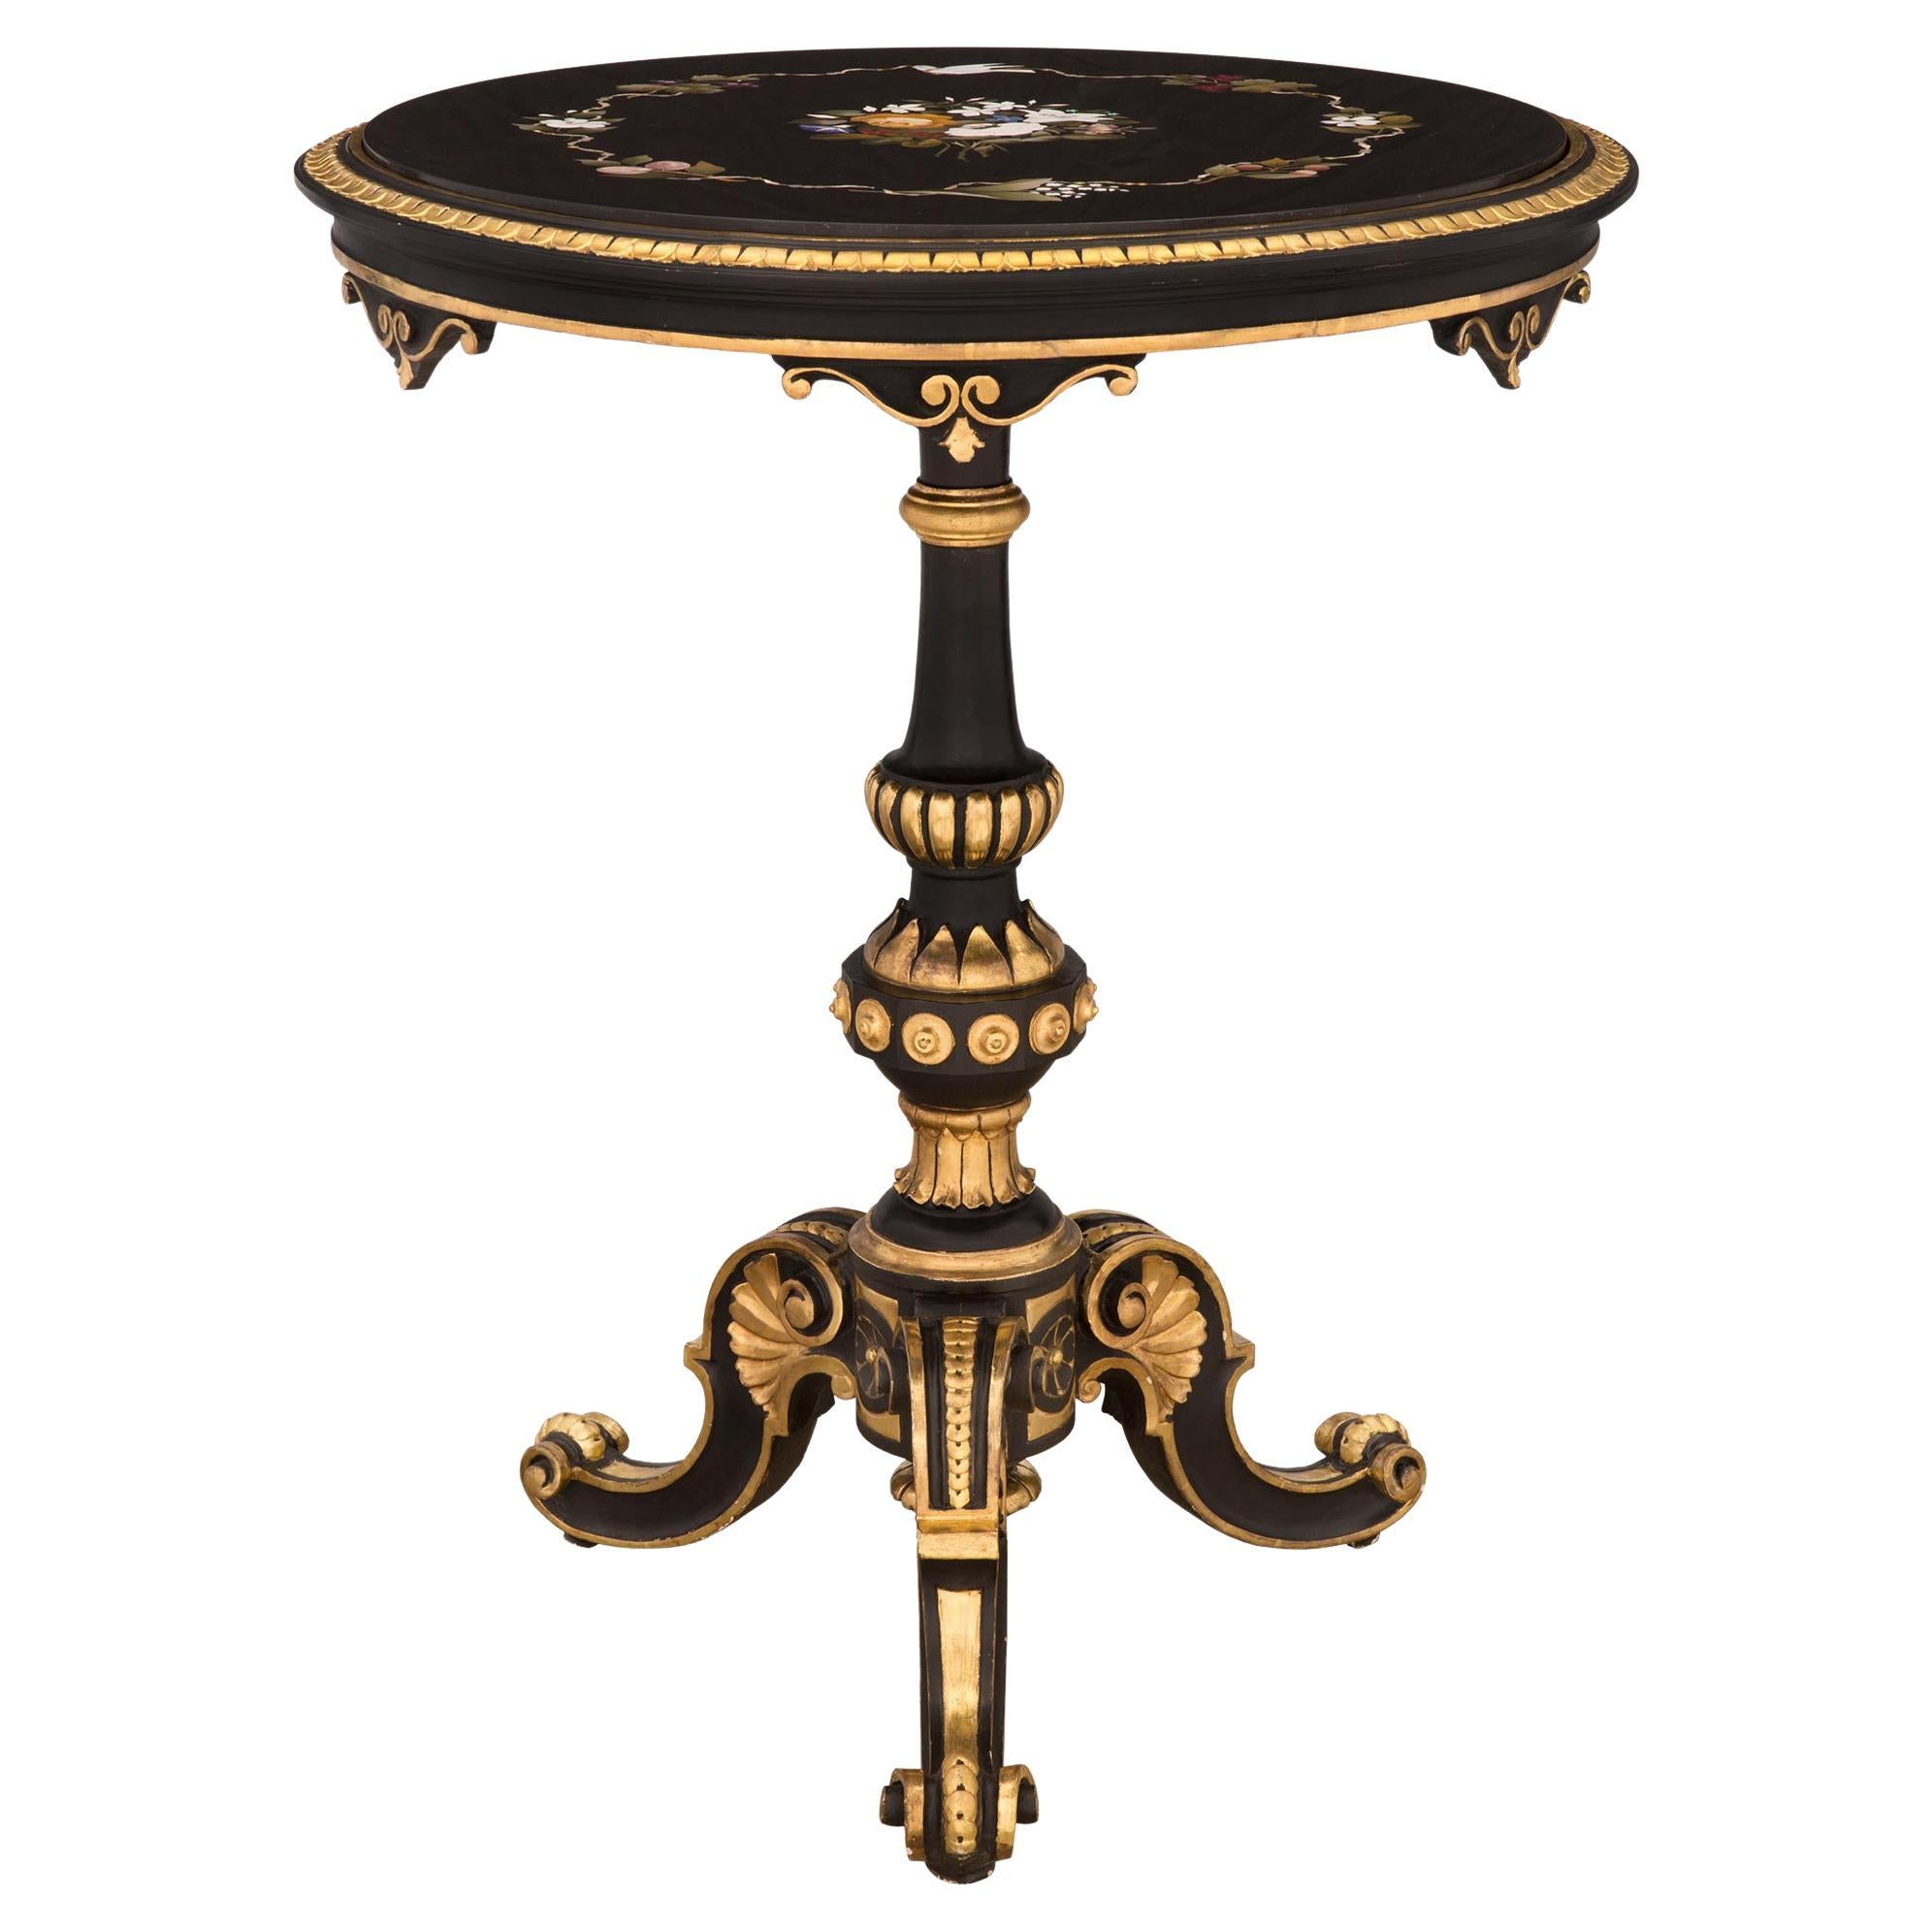 Italian 19th Century Giltwood and Pietra Dura Marble Florentine Side Table